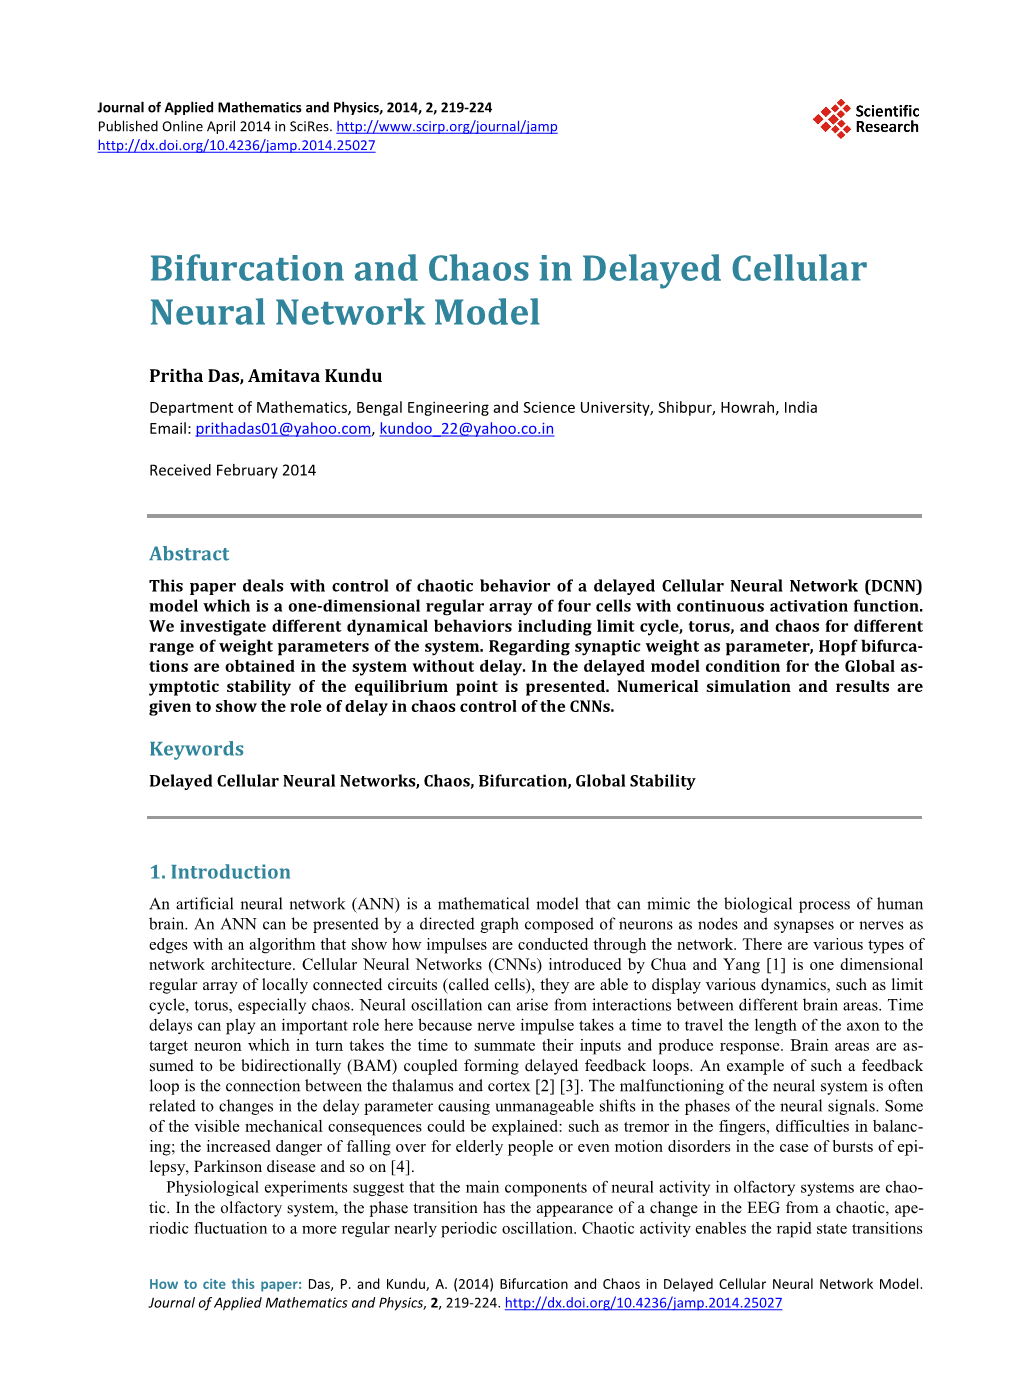 Bifurcation and Chaos in Delayed Cellular Neural Network Model